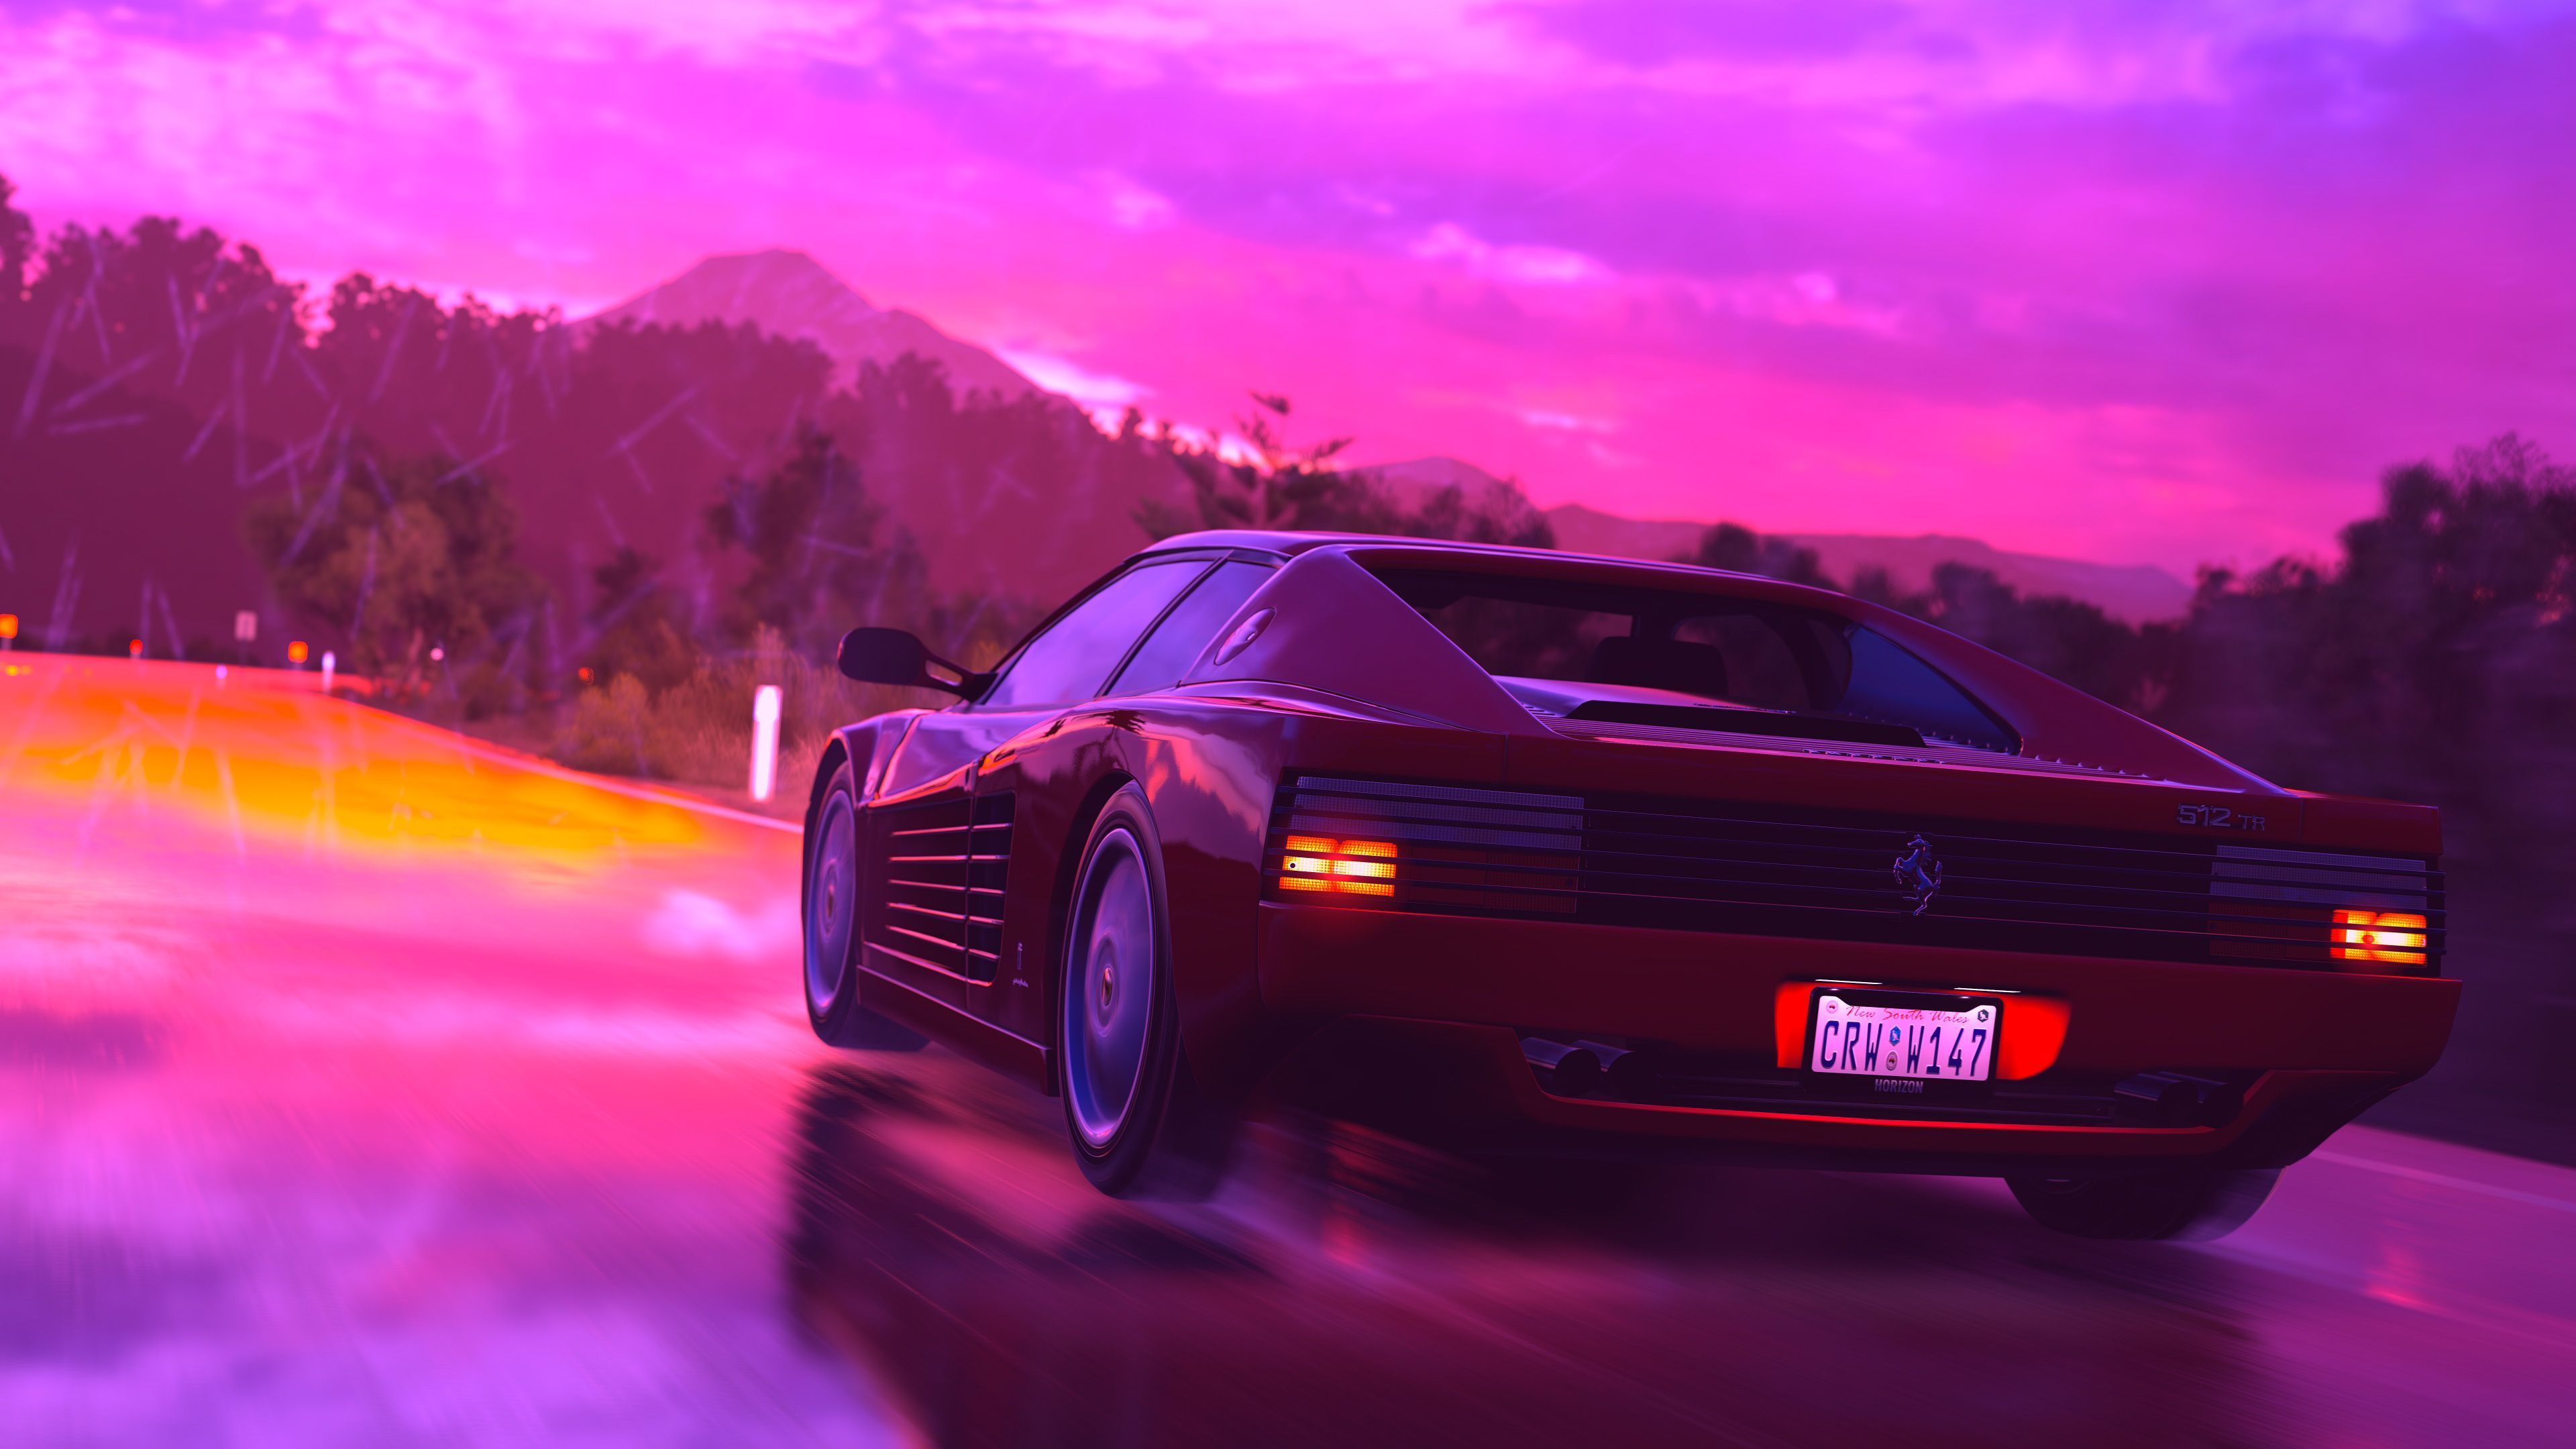 80s Car Aesthetic Wallpaper Free 80s Car Aesthetic Background